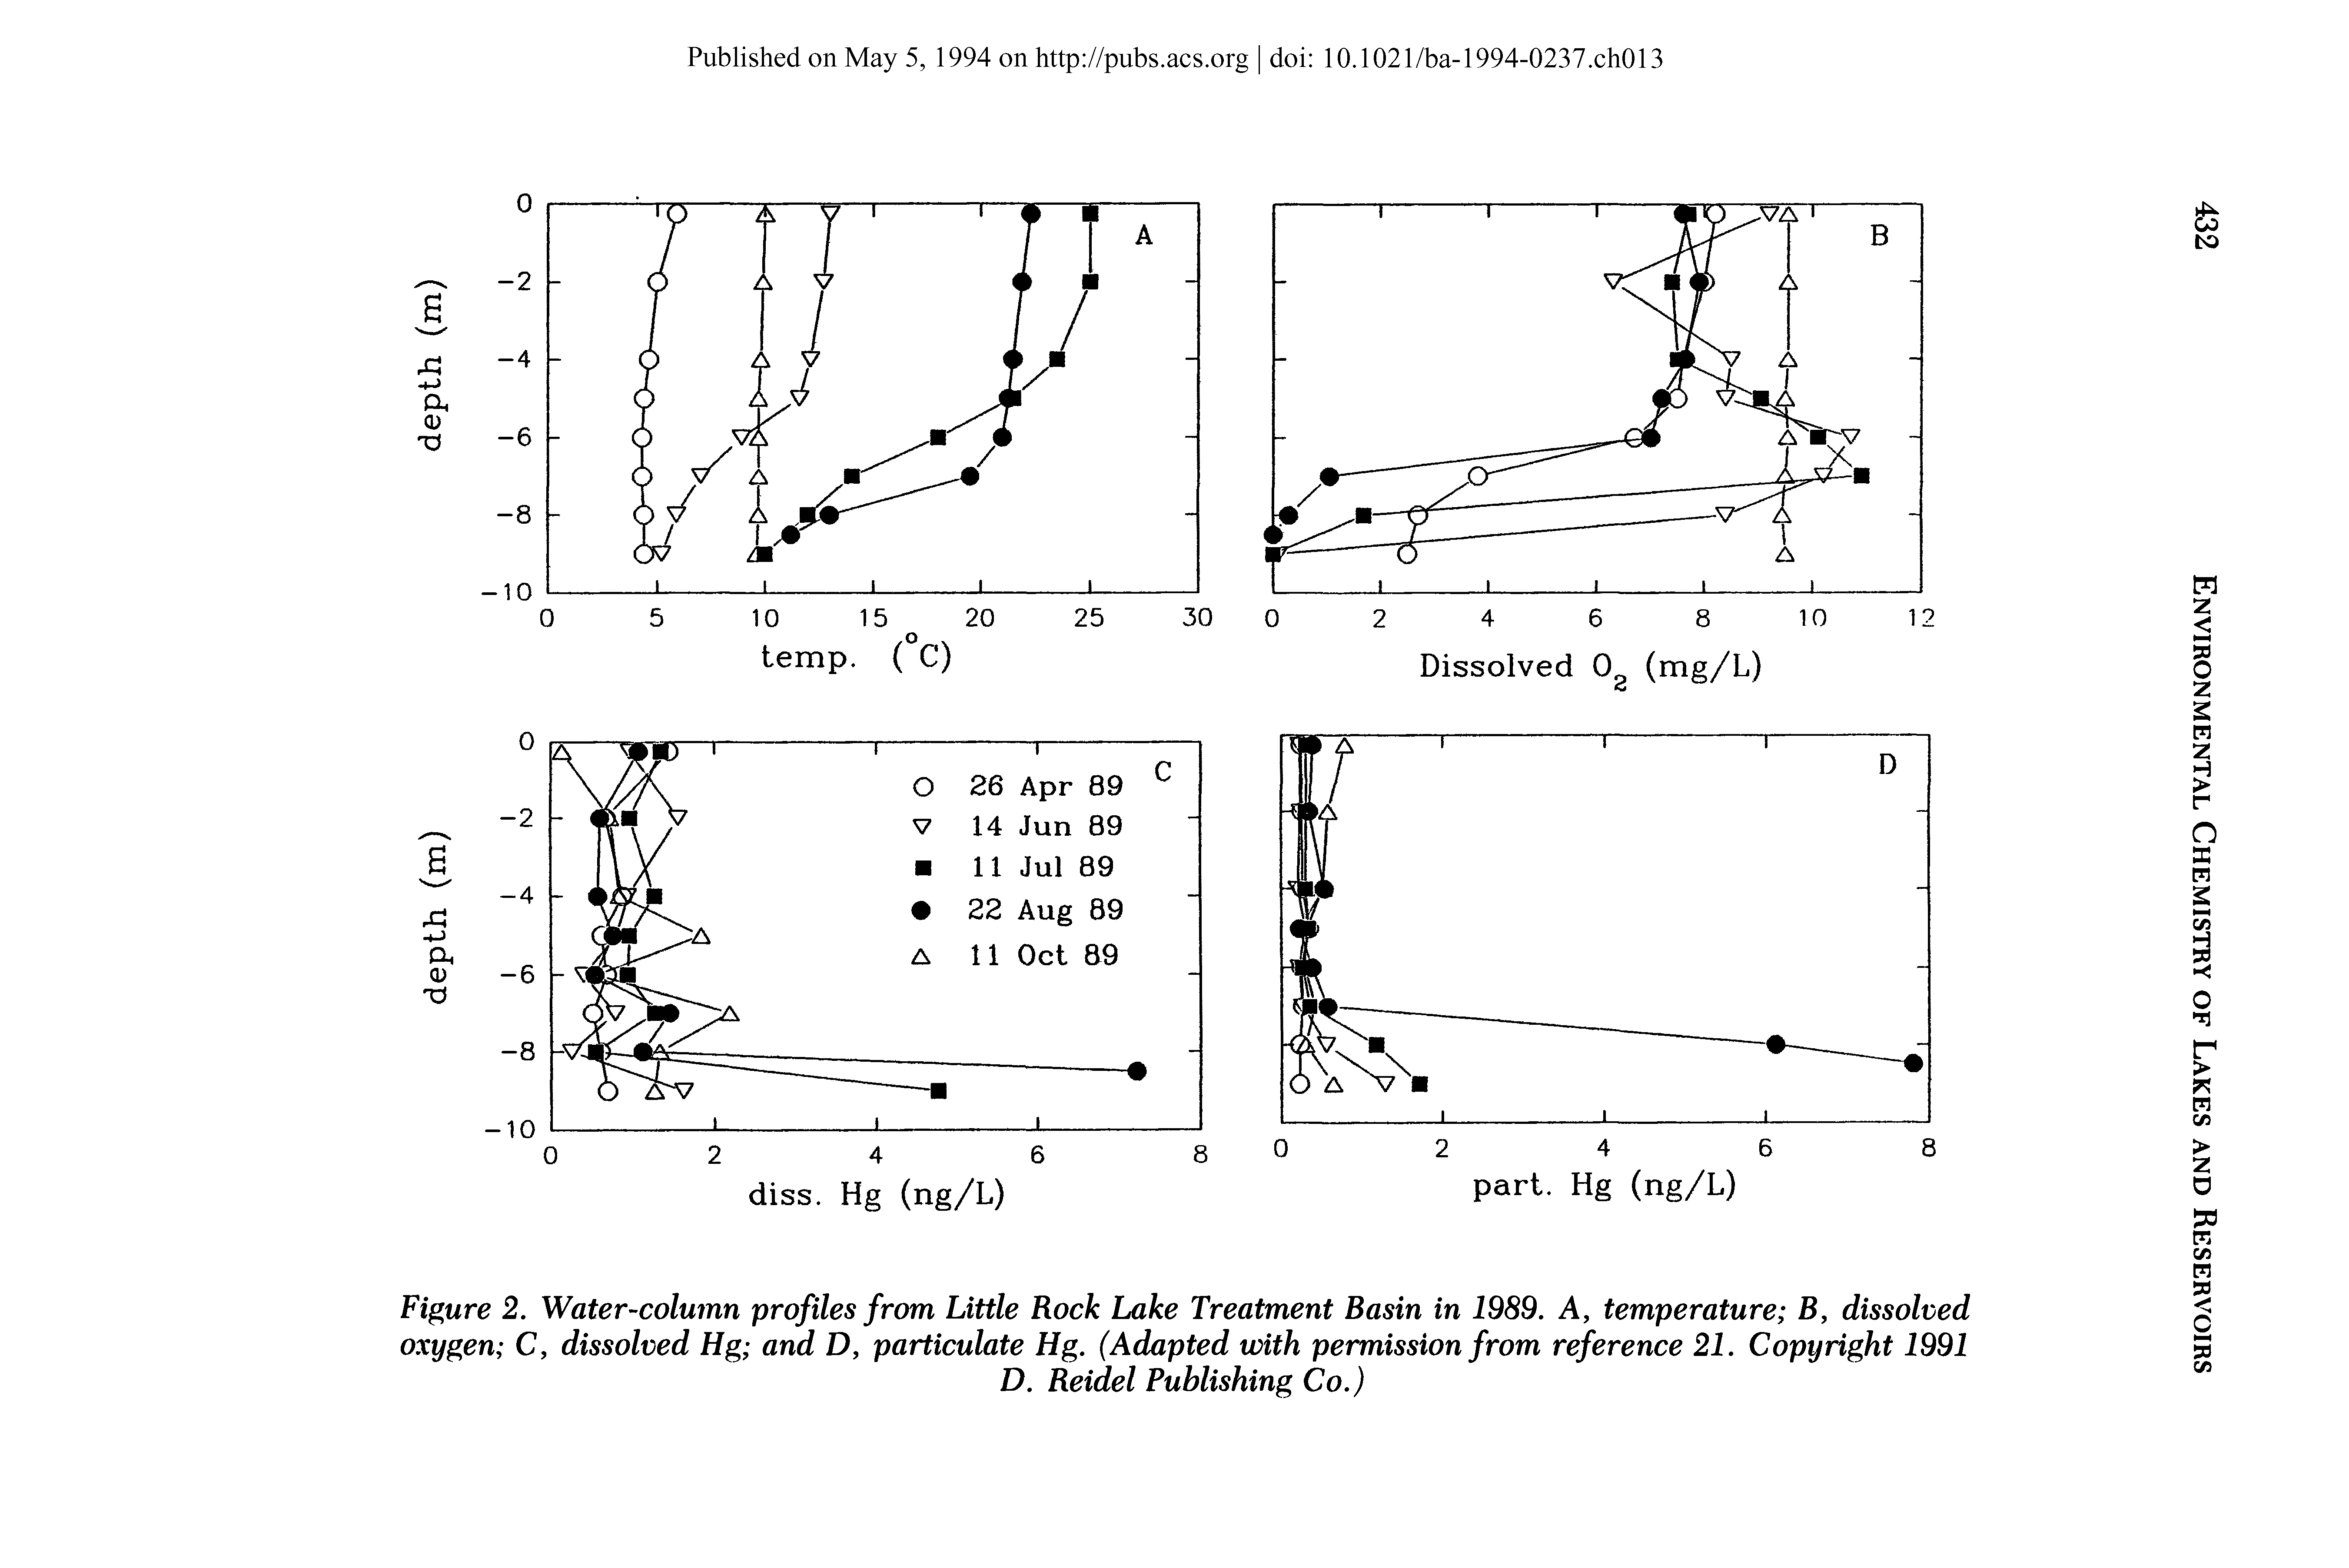 Figure 2. Water-column profiles from Little Rock Lake Treatment Basin in 1989. A, temperature B, dissolved oxygen C, dissolved Hg and D, particulate Hg. (Adapted with permission from reference 21. Copyright 1991...